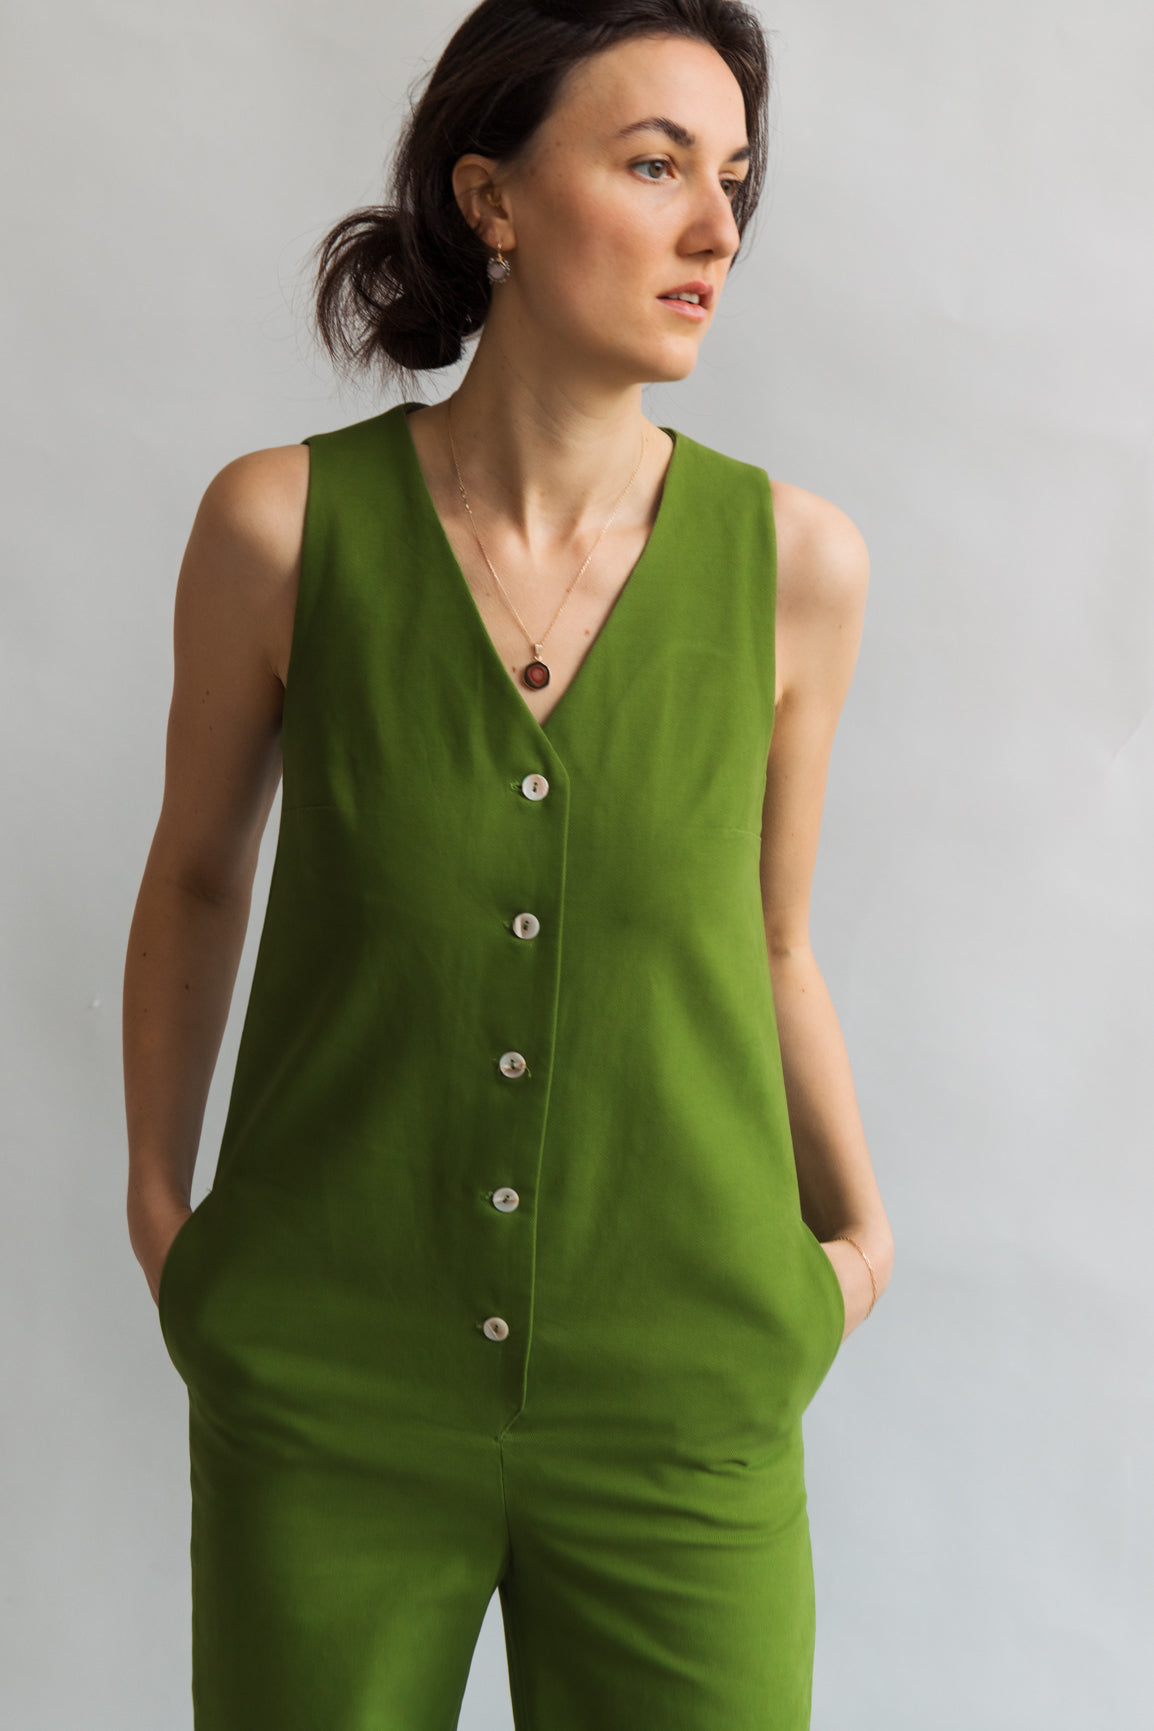 Green color Jumpsuit workwear cotton canvas with pockets 5 buttons v-neck tall girls short girls 